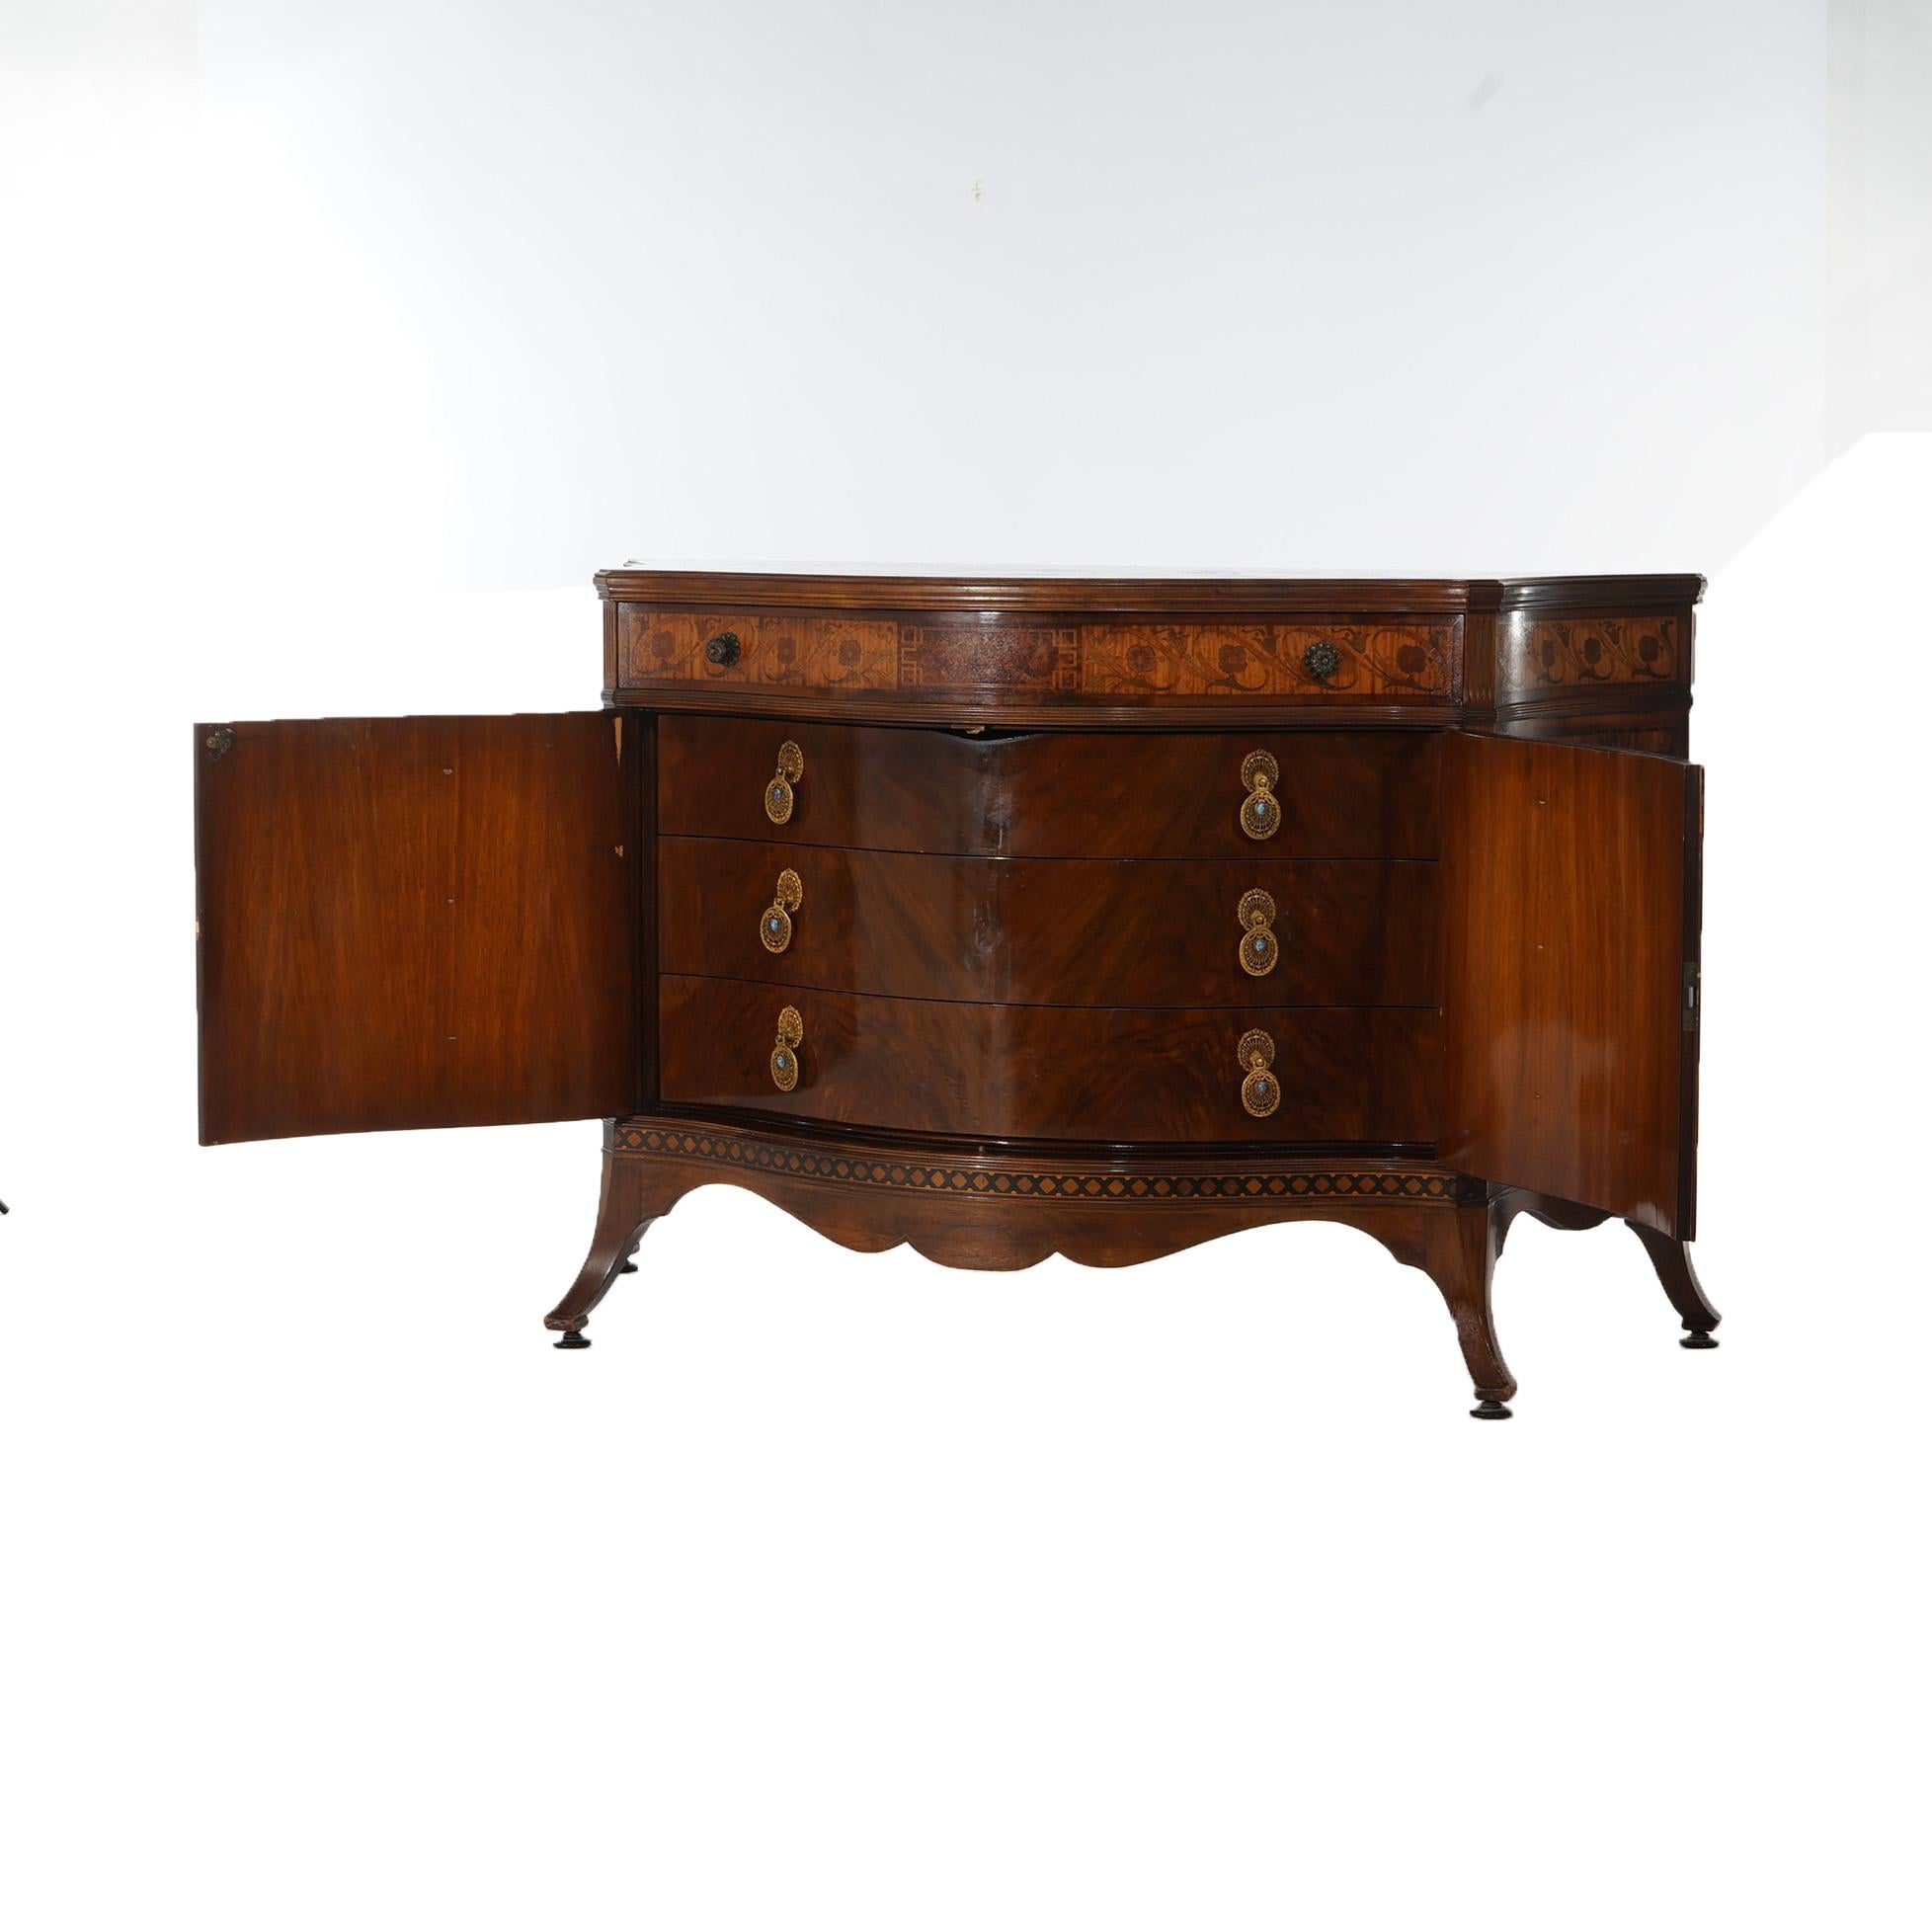 ***Ask About Reduced In-House Shipping Rates - Reliable Service & Fully Insured***
An antique French style sideboard by Johnson Furniture Co. offers rosewood and satinwood construction with floral and scroll marquetry inlay throughout and in swell